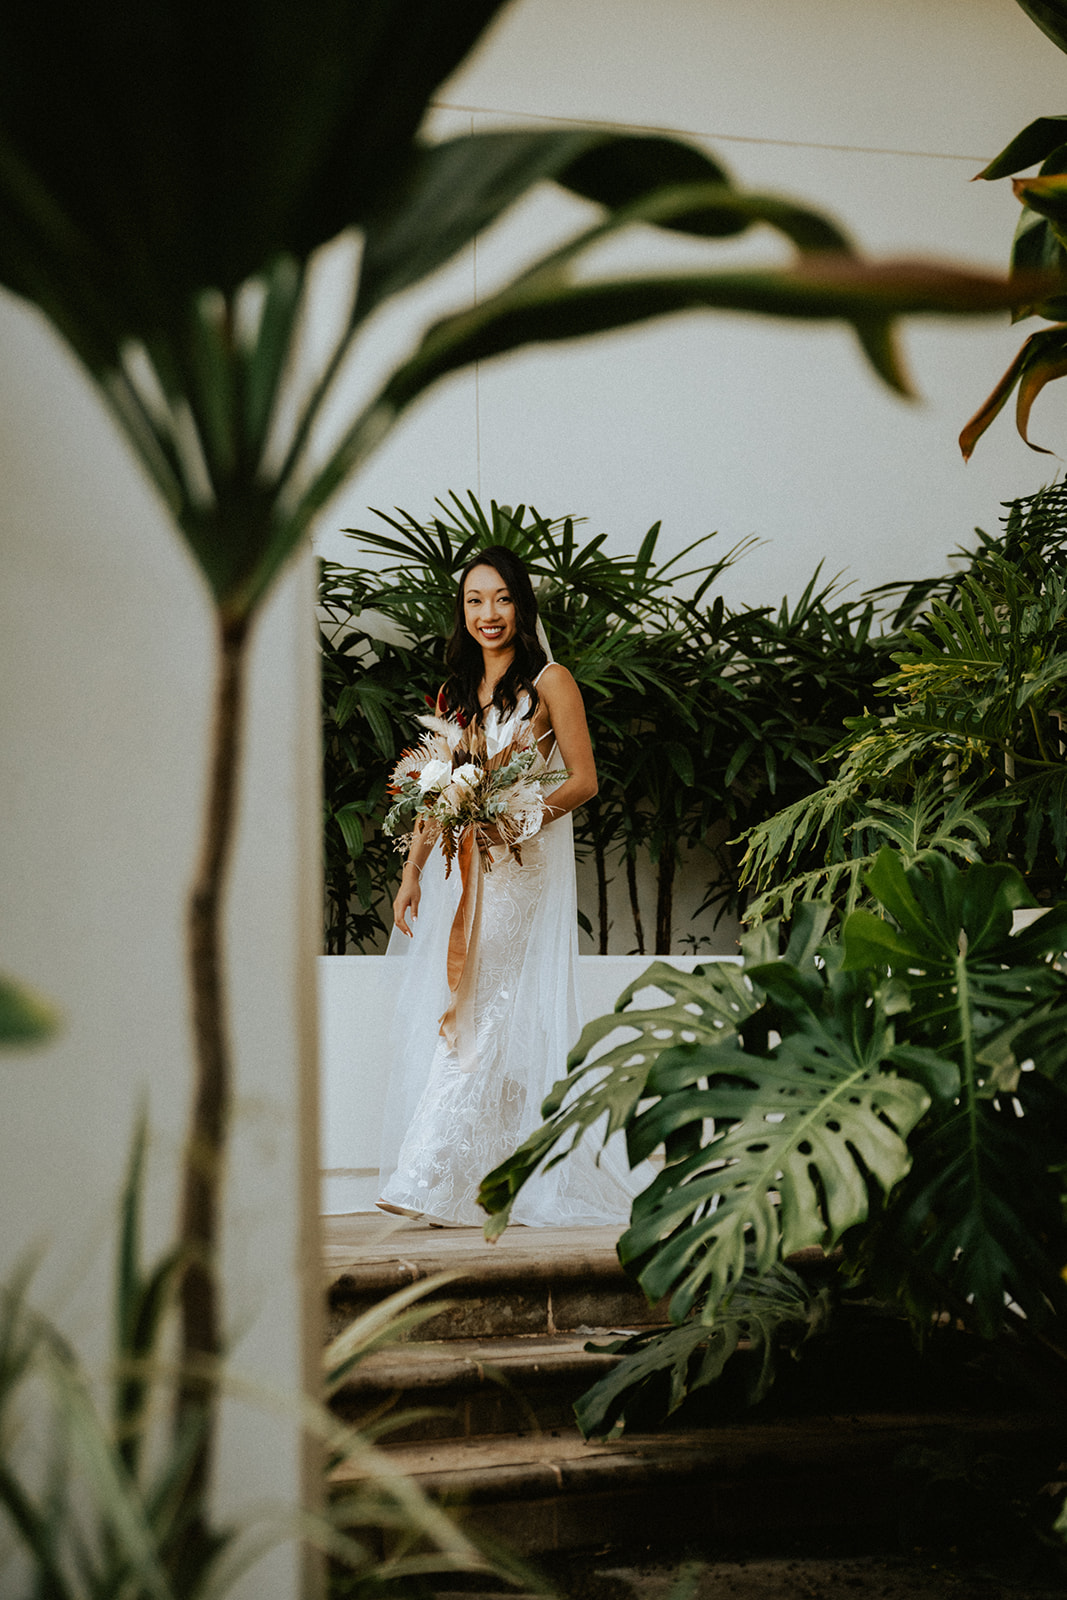 First Look with the bride and groom at the luxurious Four Seasons Resort Koi pond and Gardens